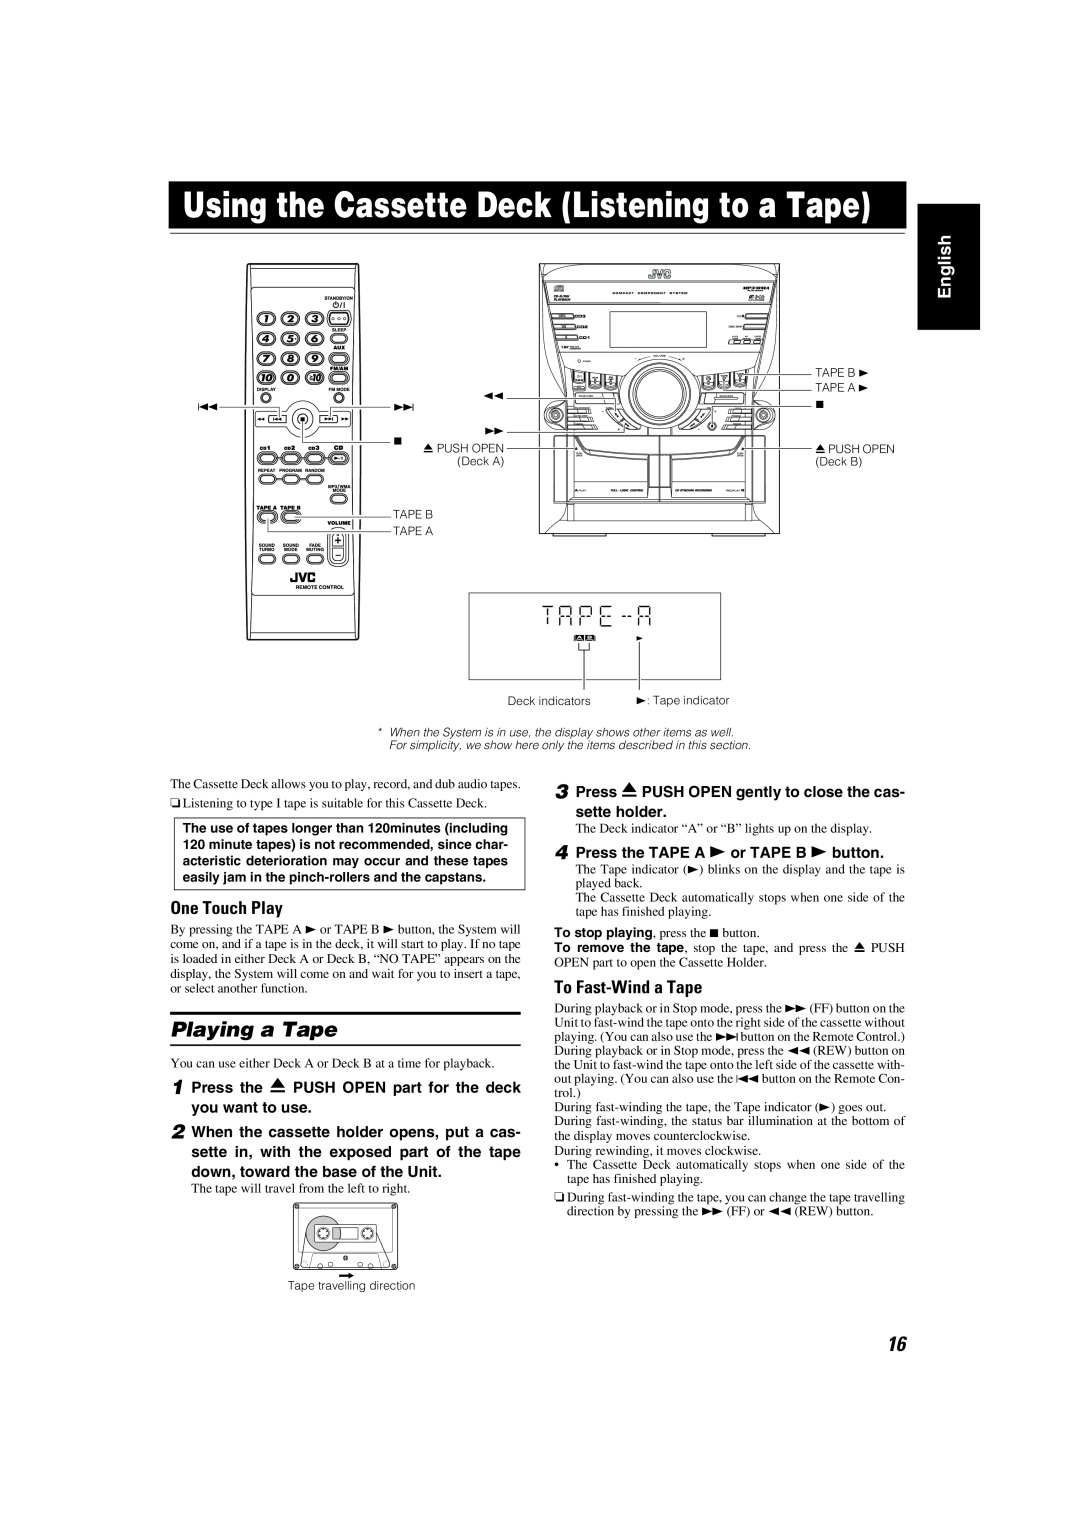 JVC MX-KC45 manual Using the Cassette Deck Listening to a Tape, Playing a Tape, English, One Touch Play, To Fast-Winda Tape 